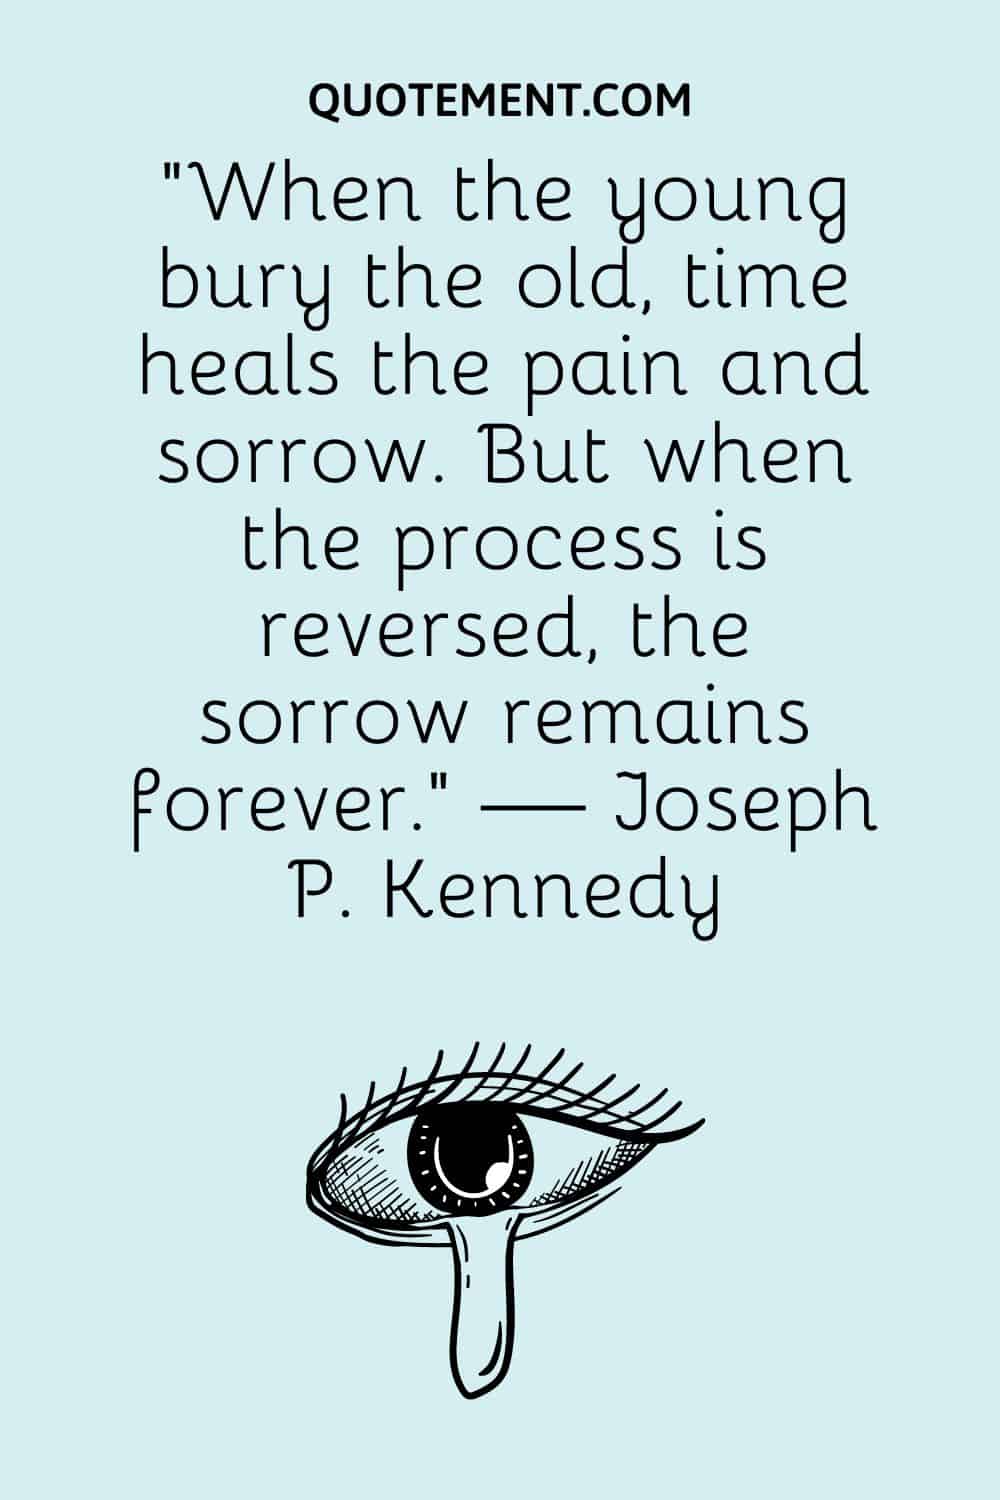 “When the young bury the old, time heals the pain and sorrow. But when the process is reversed, the sorrow remains forever.” — Joseph P. Kennedy